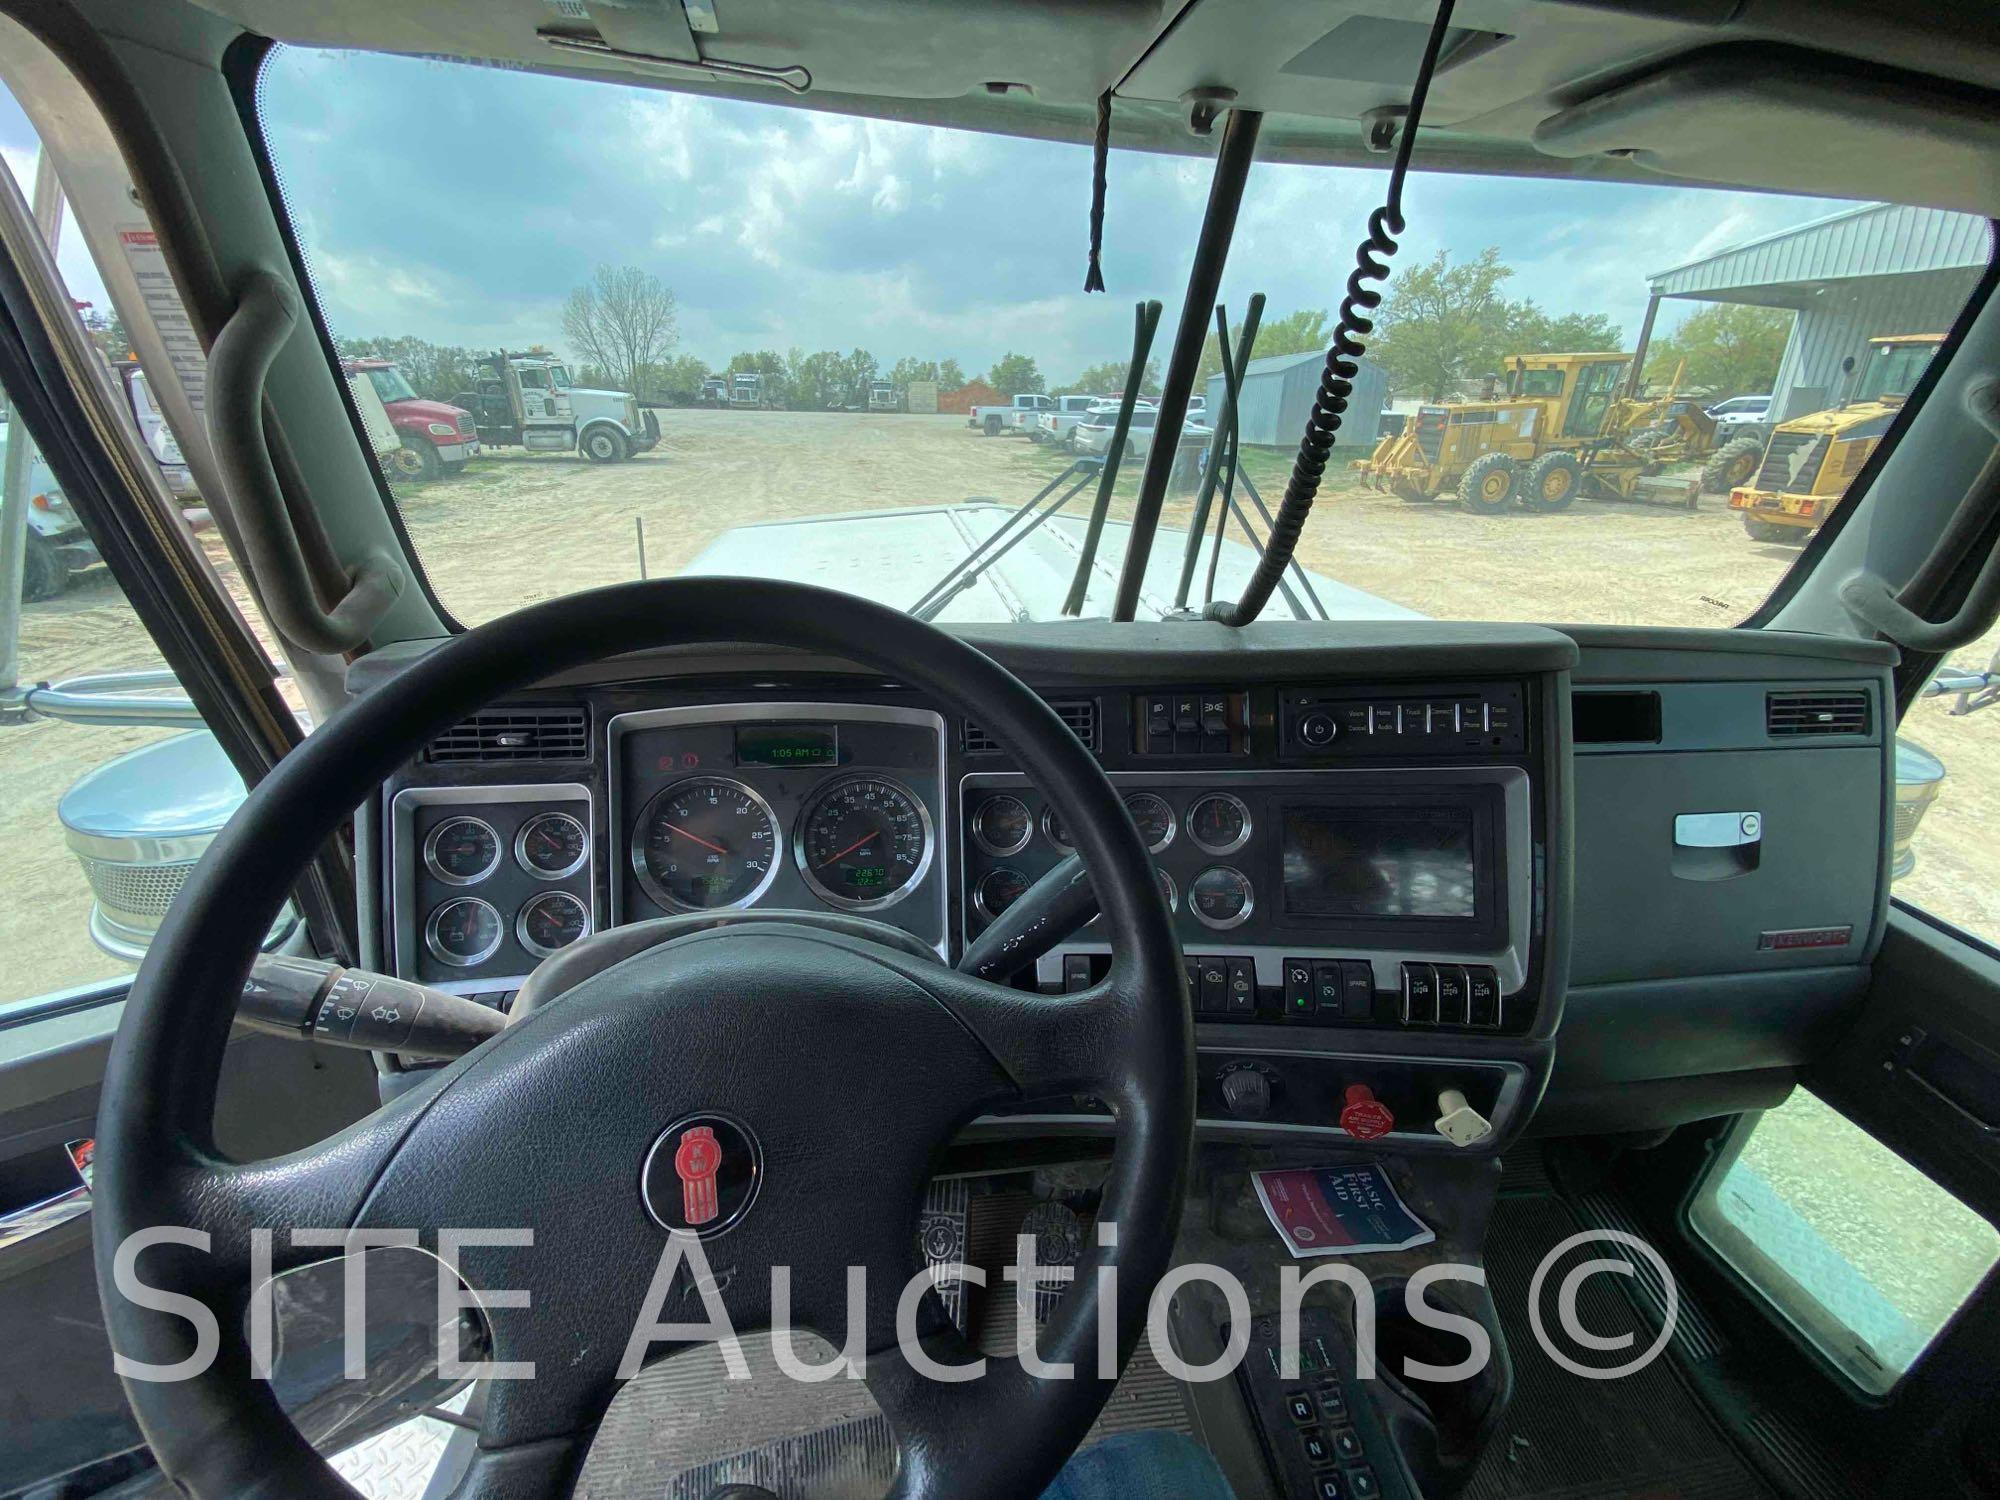 2013 Kenworth C500 T/A T/A Oilfield Bed Truck